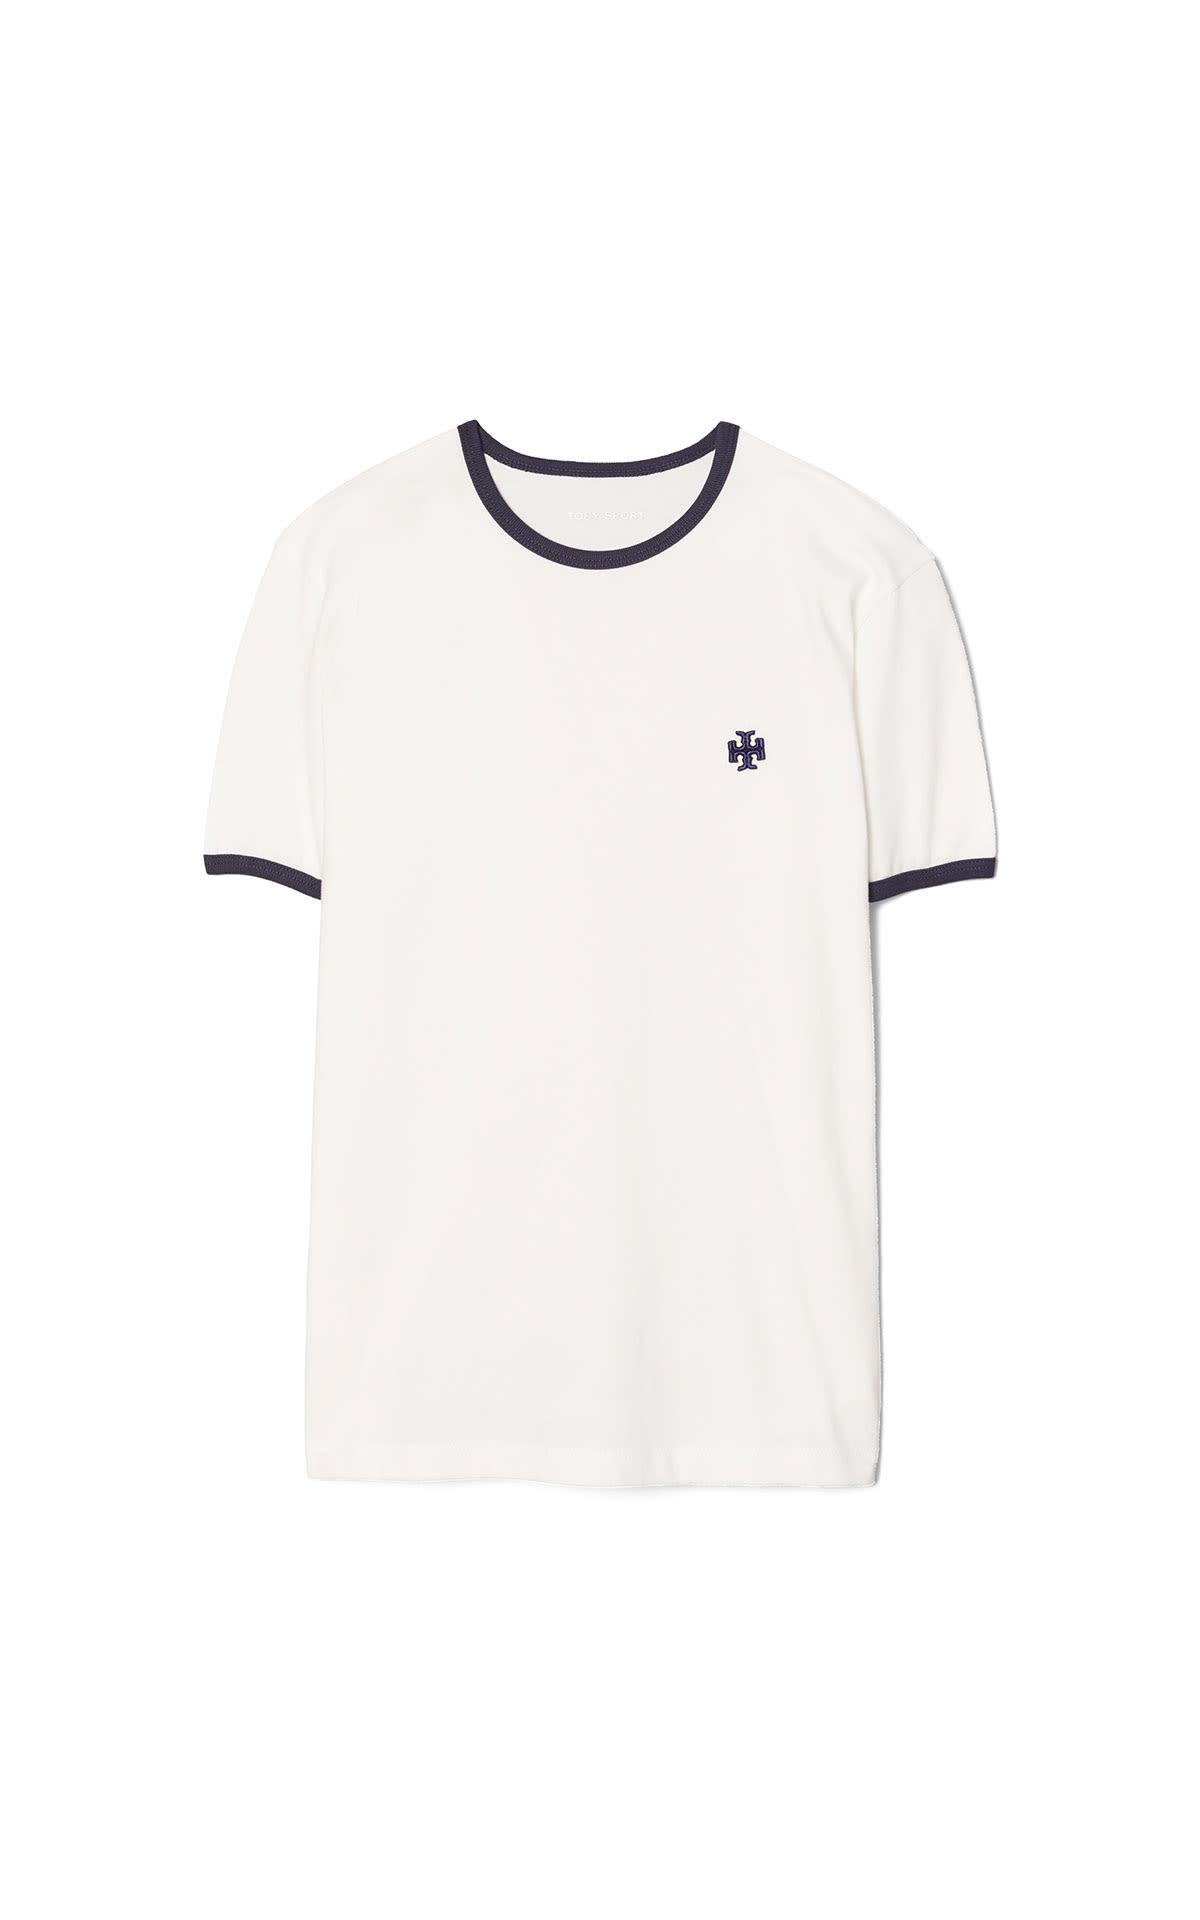 Tory Burch Ringer t-shirt from Bicester Village